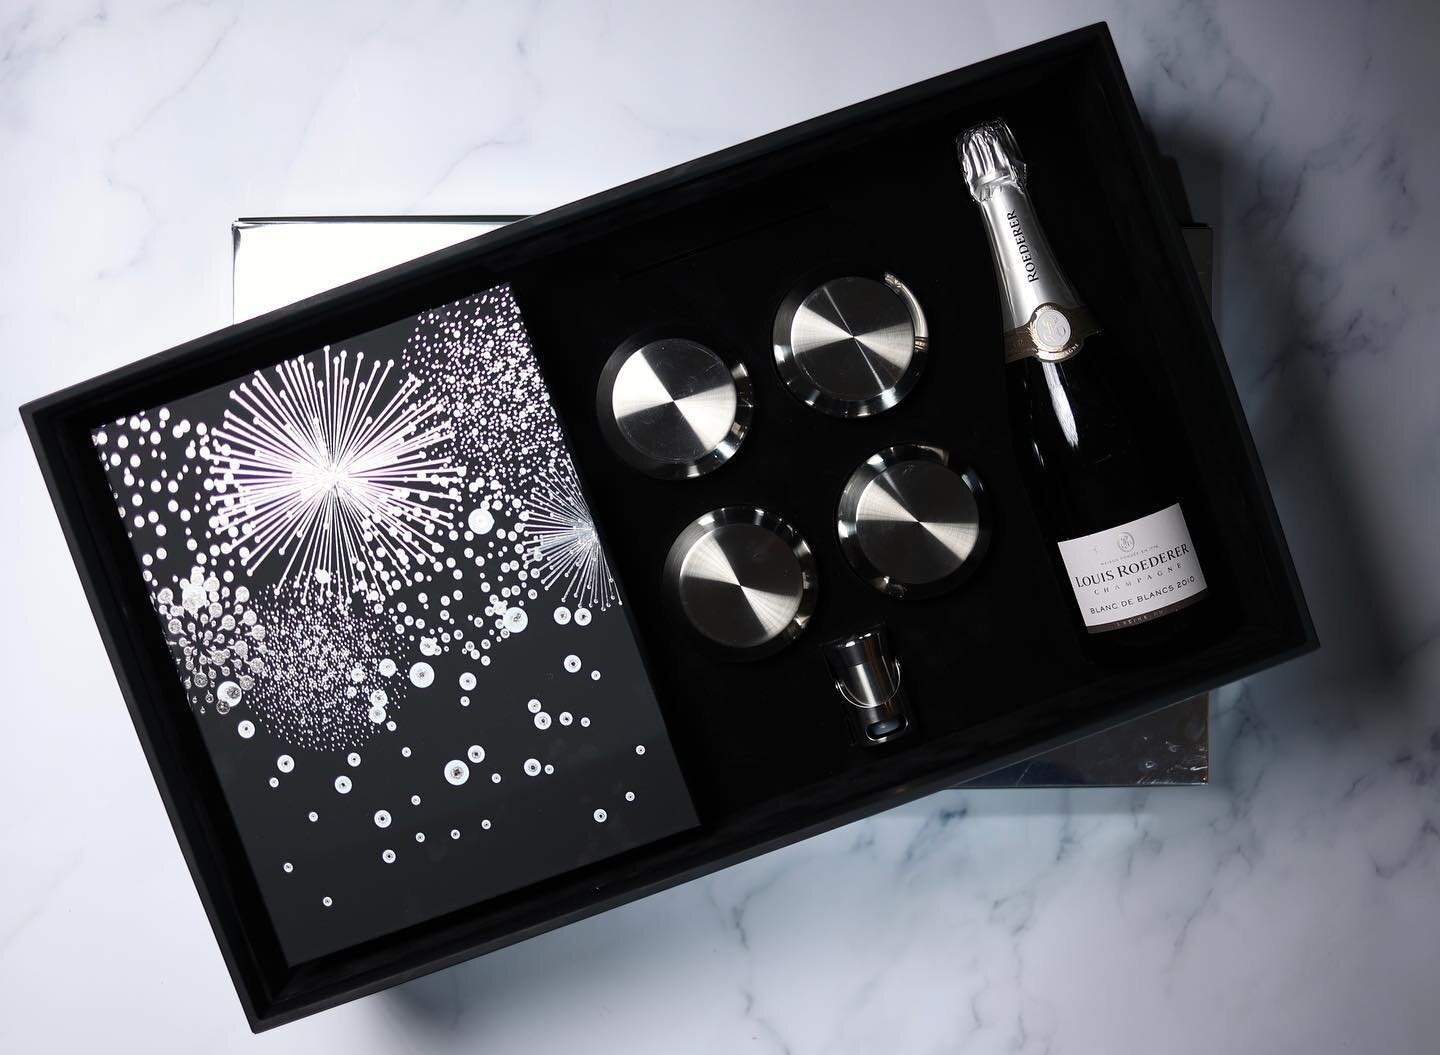 The new elevated way of gifting. 
Details for your next client or corporate gift that shouldn&rsquo;t be overlooked. Start creating with us today at OCNYC.com.

Part of the OCC EXPERIENCE COLLECTION.

#OlivierChengCateringAndEvents #OCC #Luxury #NYC 